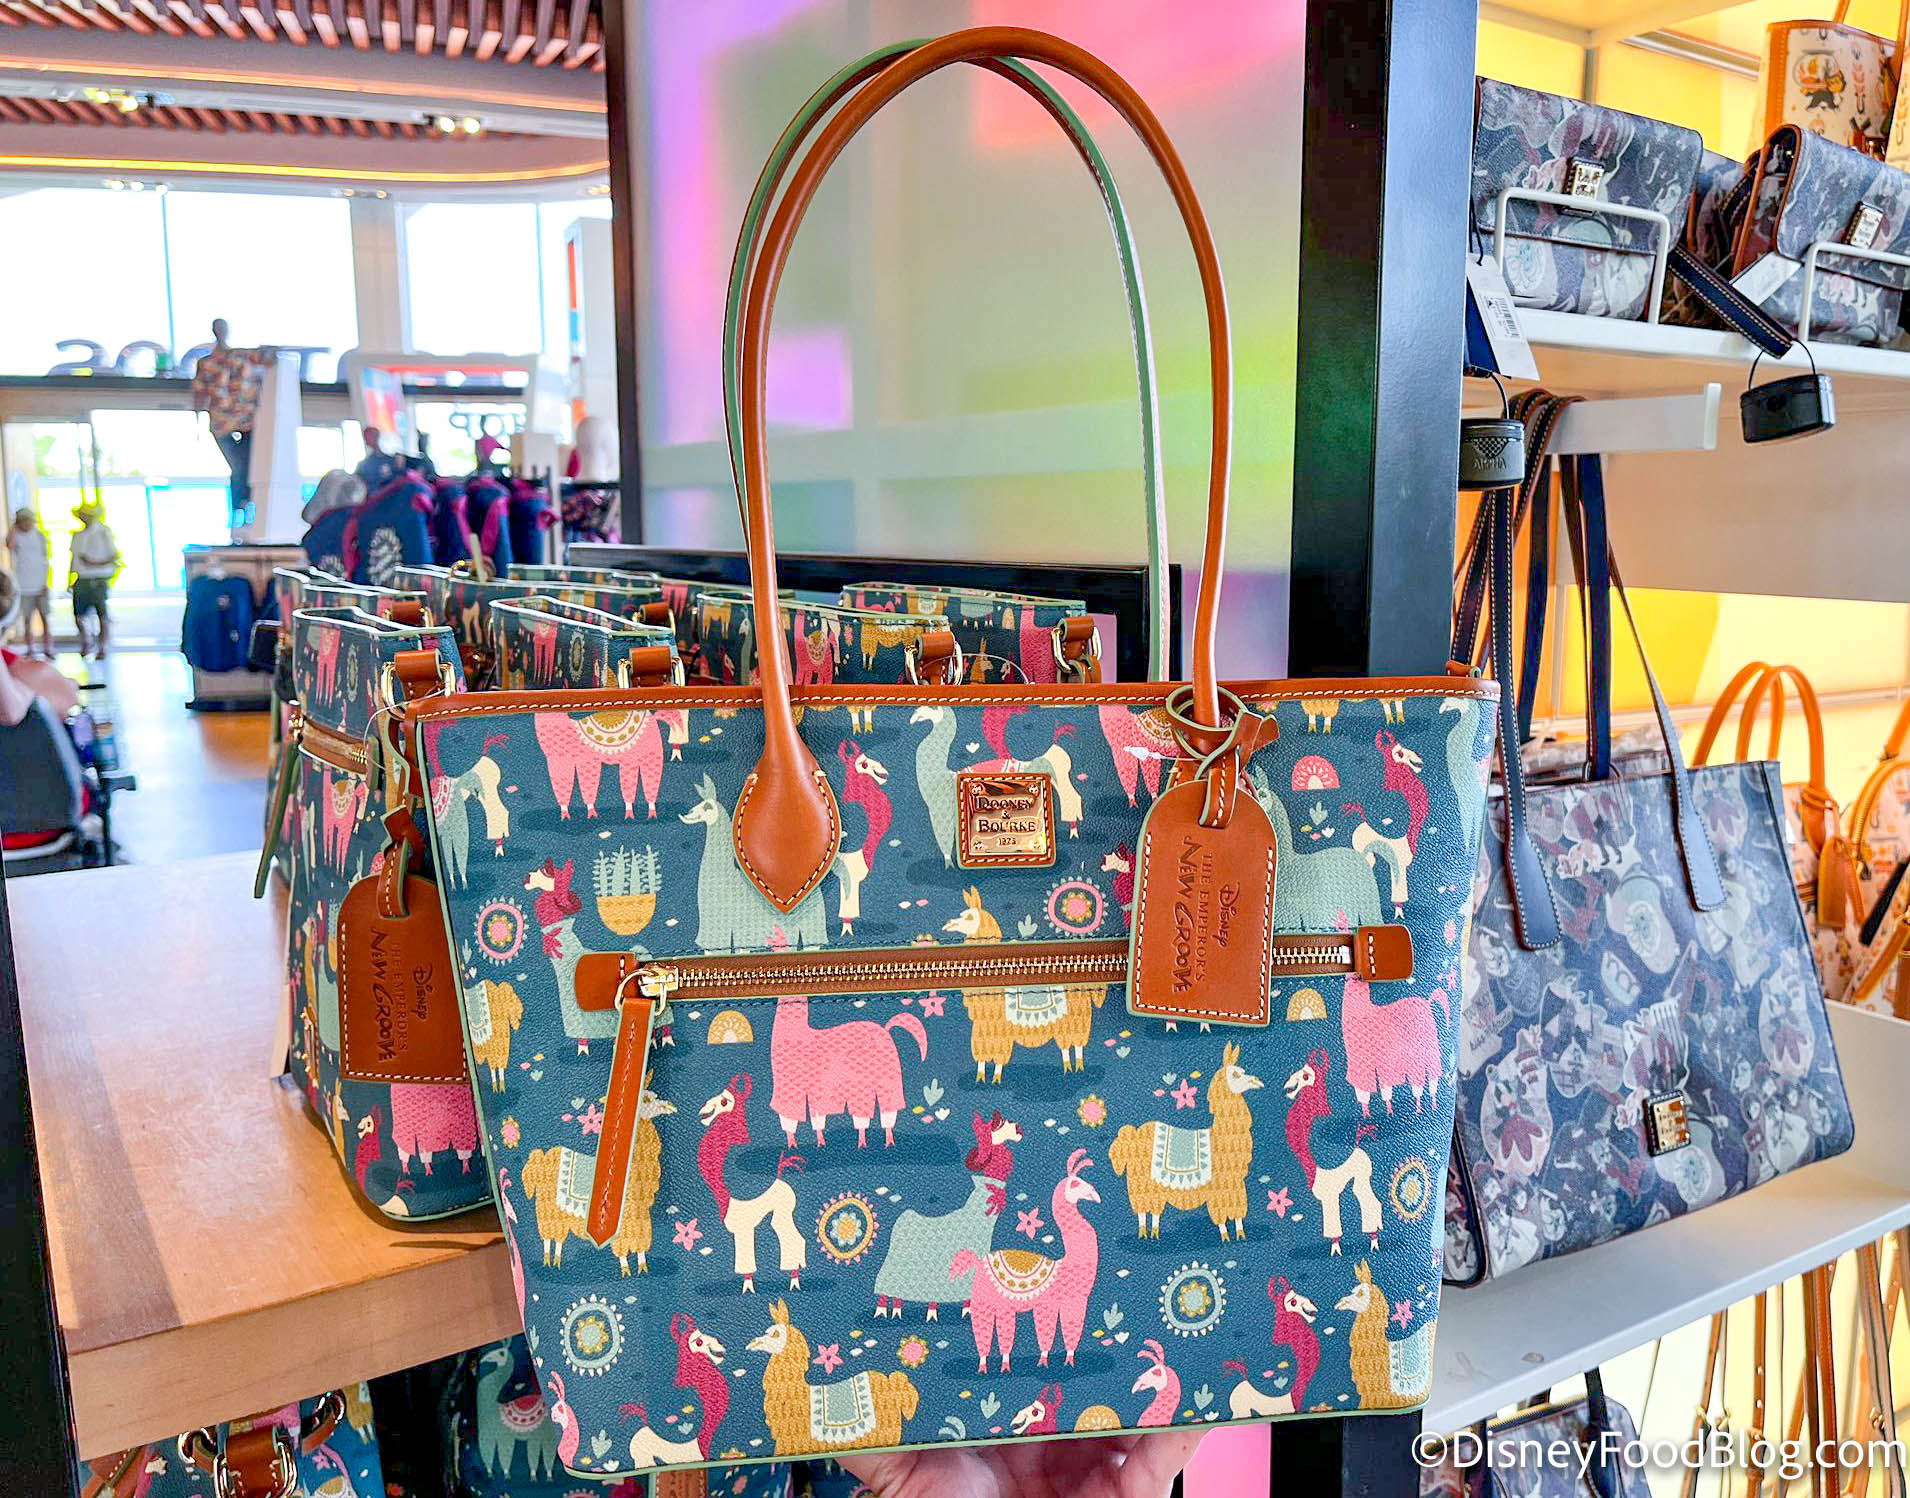 DOONEY & BOURKE OUTLET -HANDBAGS SHOPPING UP to 50% OFF January 1, 2022 